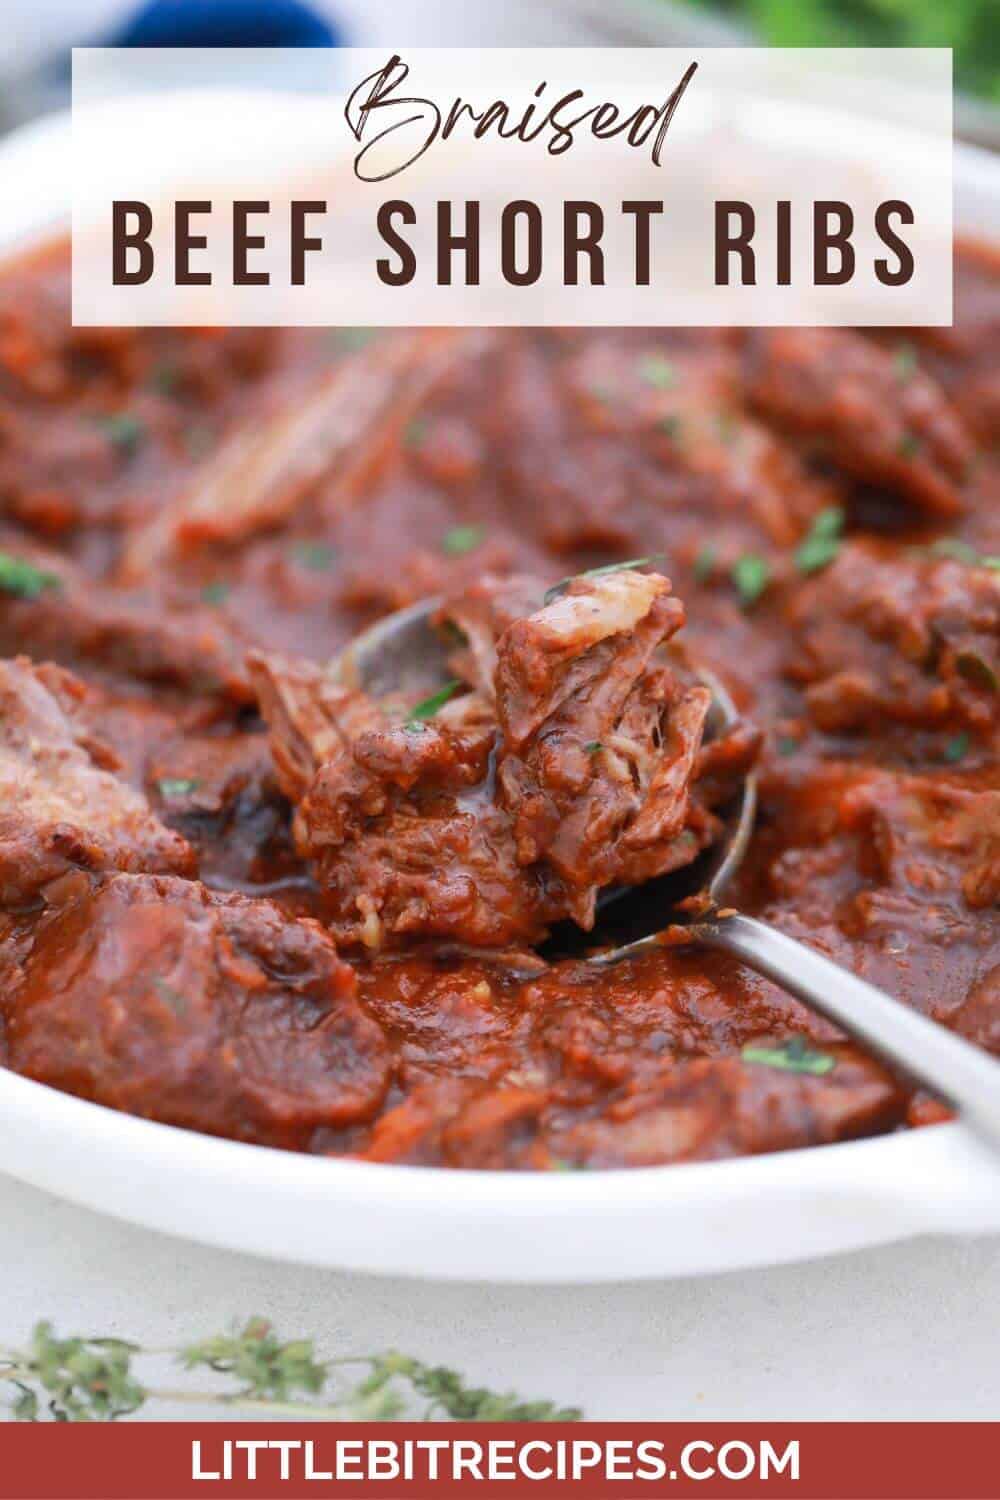 braised short ribs with text.